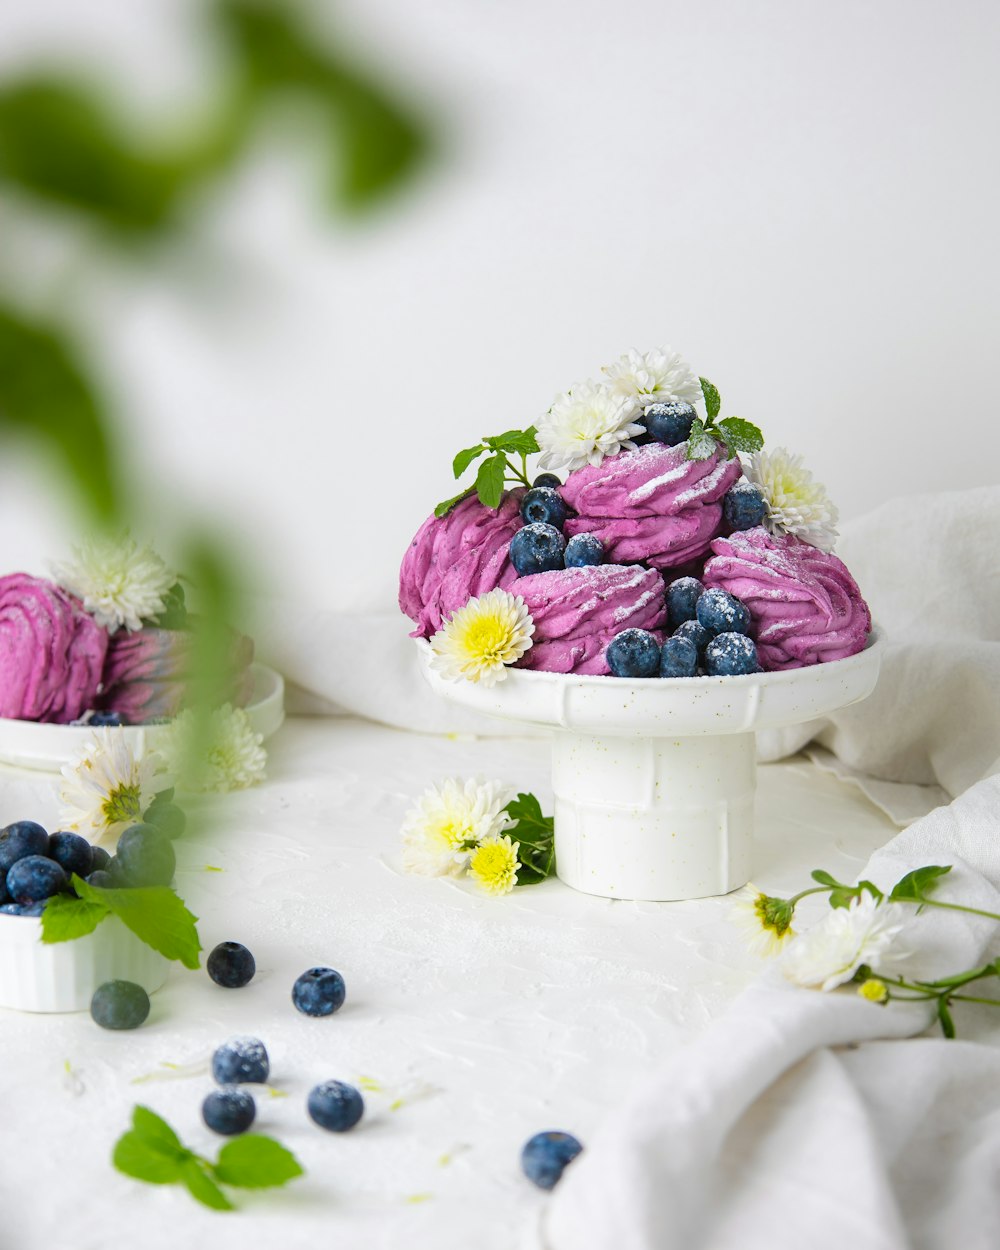 a cake with blueberries, raspberries, and daisies on a white